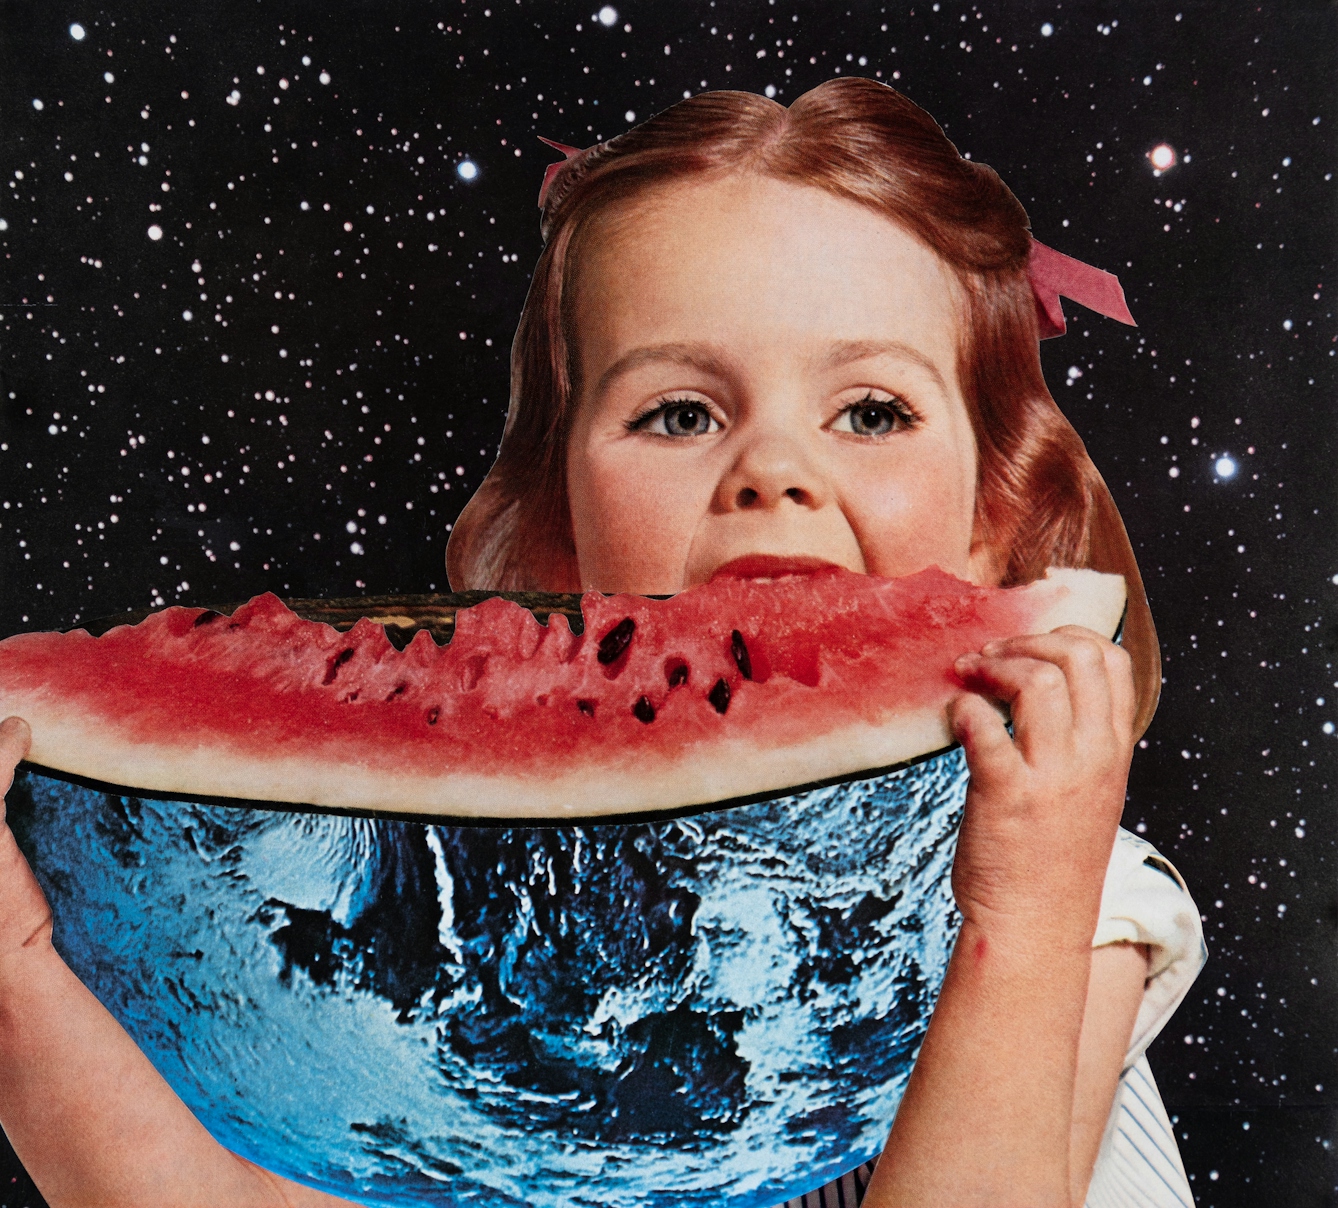 Paper collage artwork of a large girl eating a watermelon, where the skin of the watermelon has been replaced with the planet earth, against a backdrop of stars.